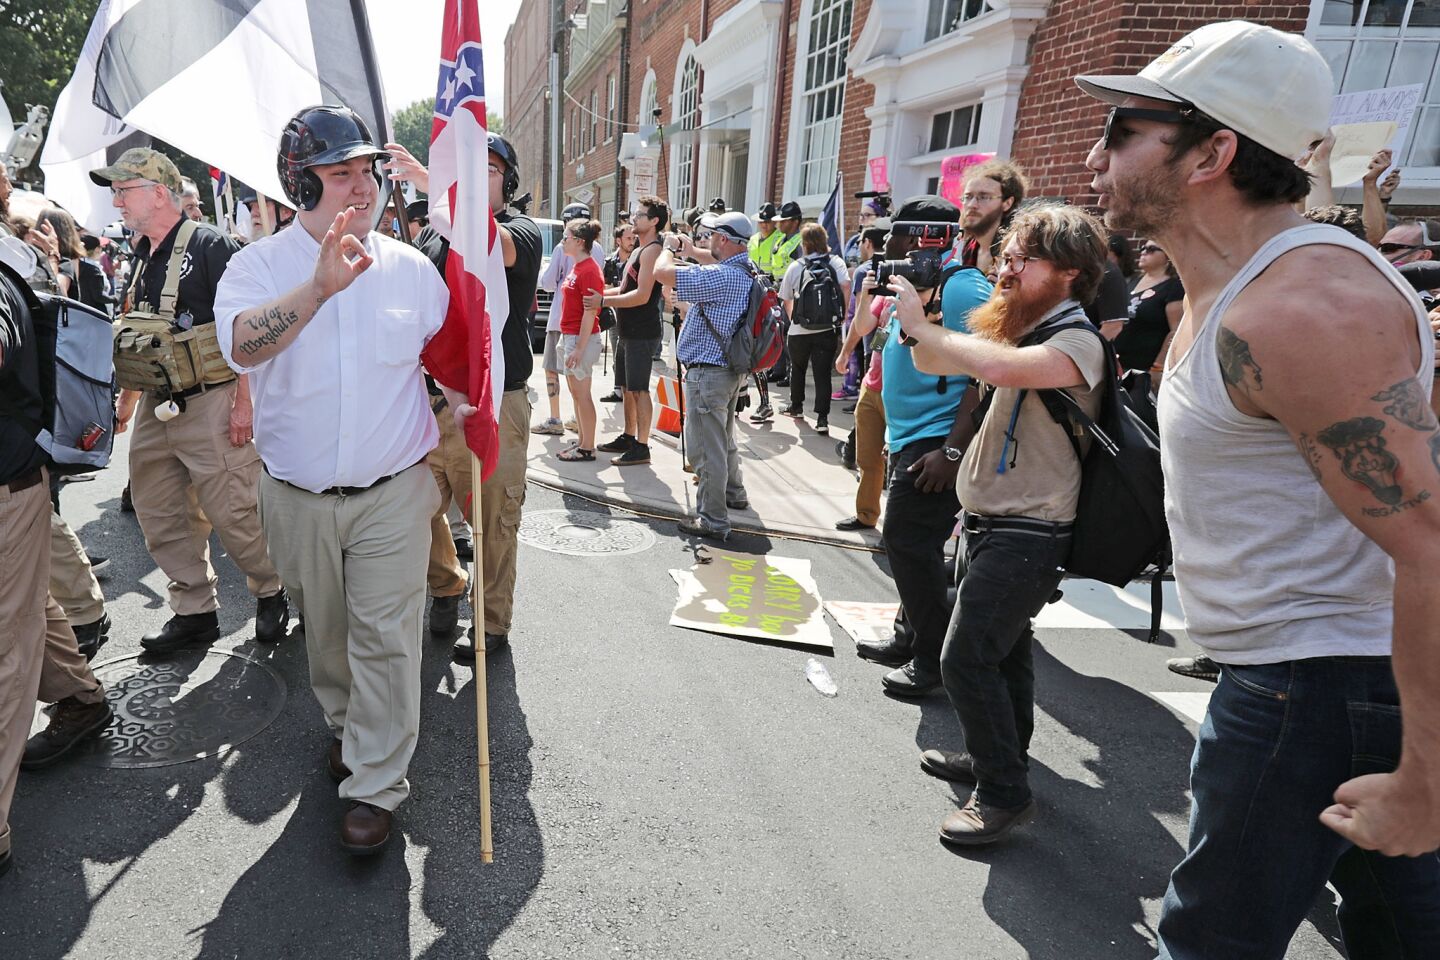 Hundreds of white nationalists, neo-Nazis and members of the "alt-right" are confronted by counter-protesters as they march down East Market Street toward Lee Park during the "United the Right" rally in Charlottesville, Va.